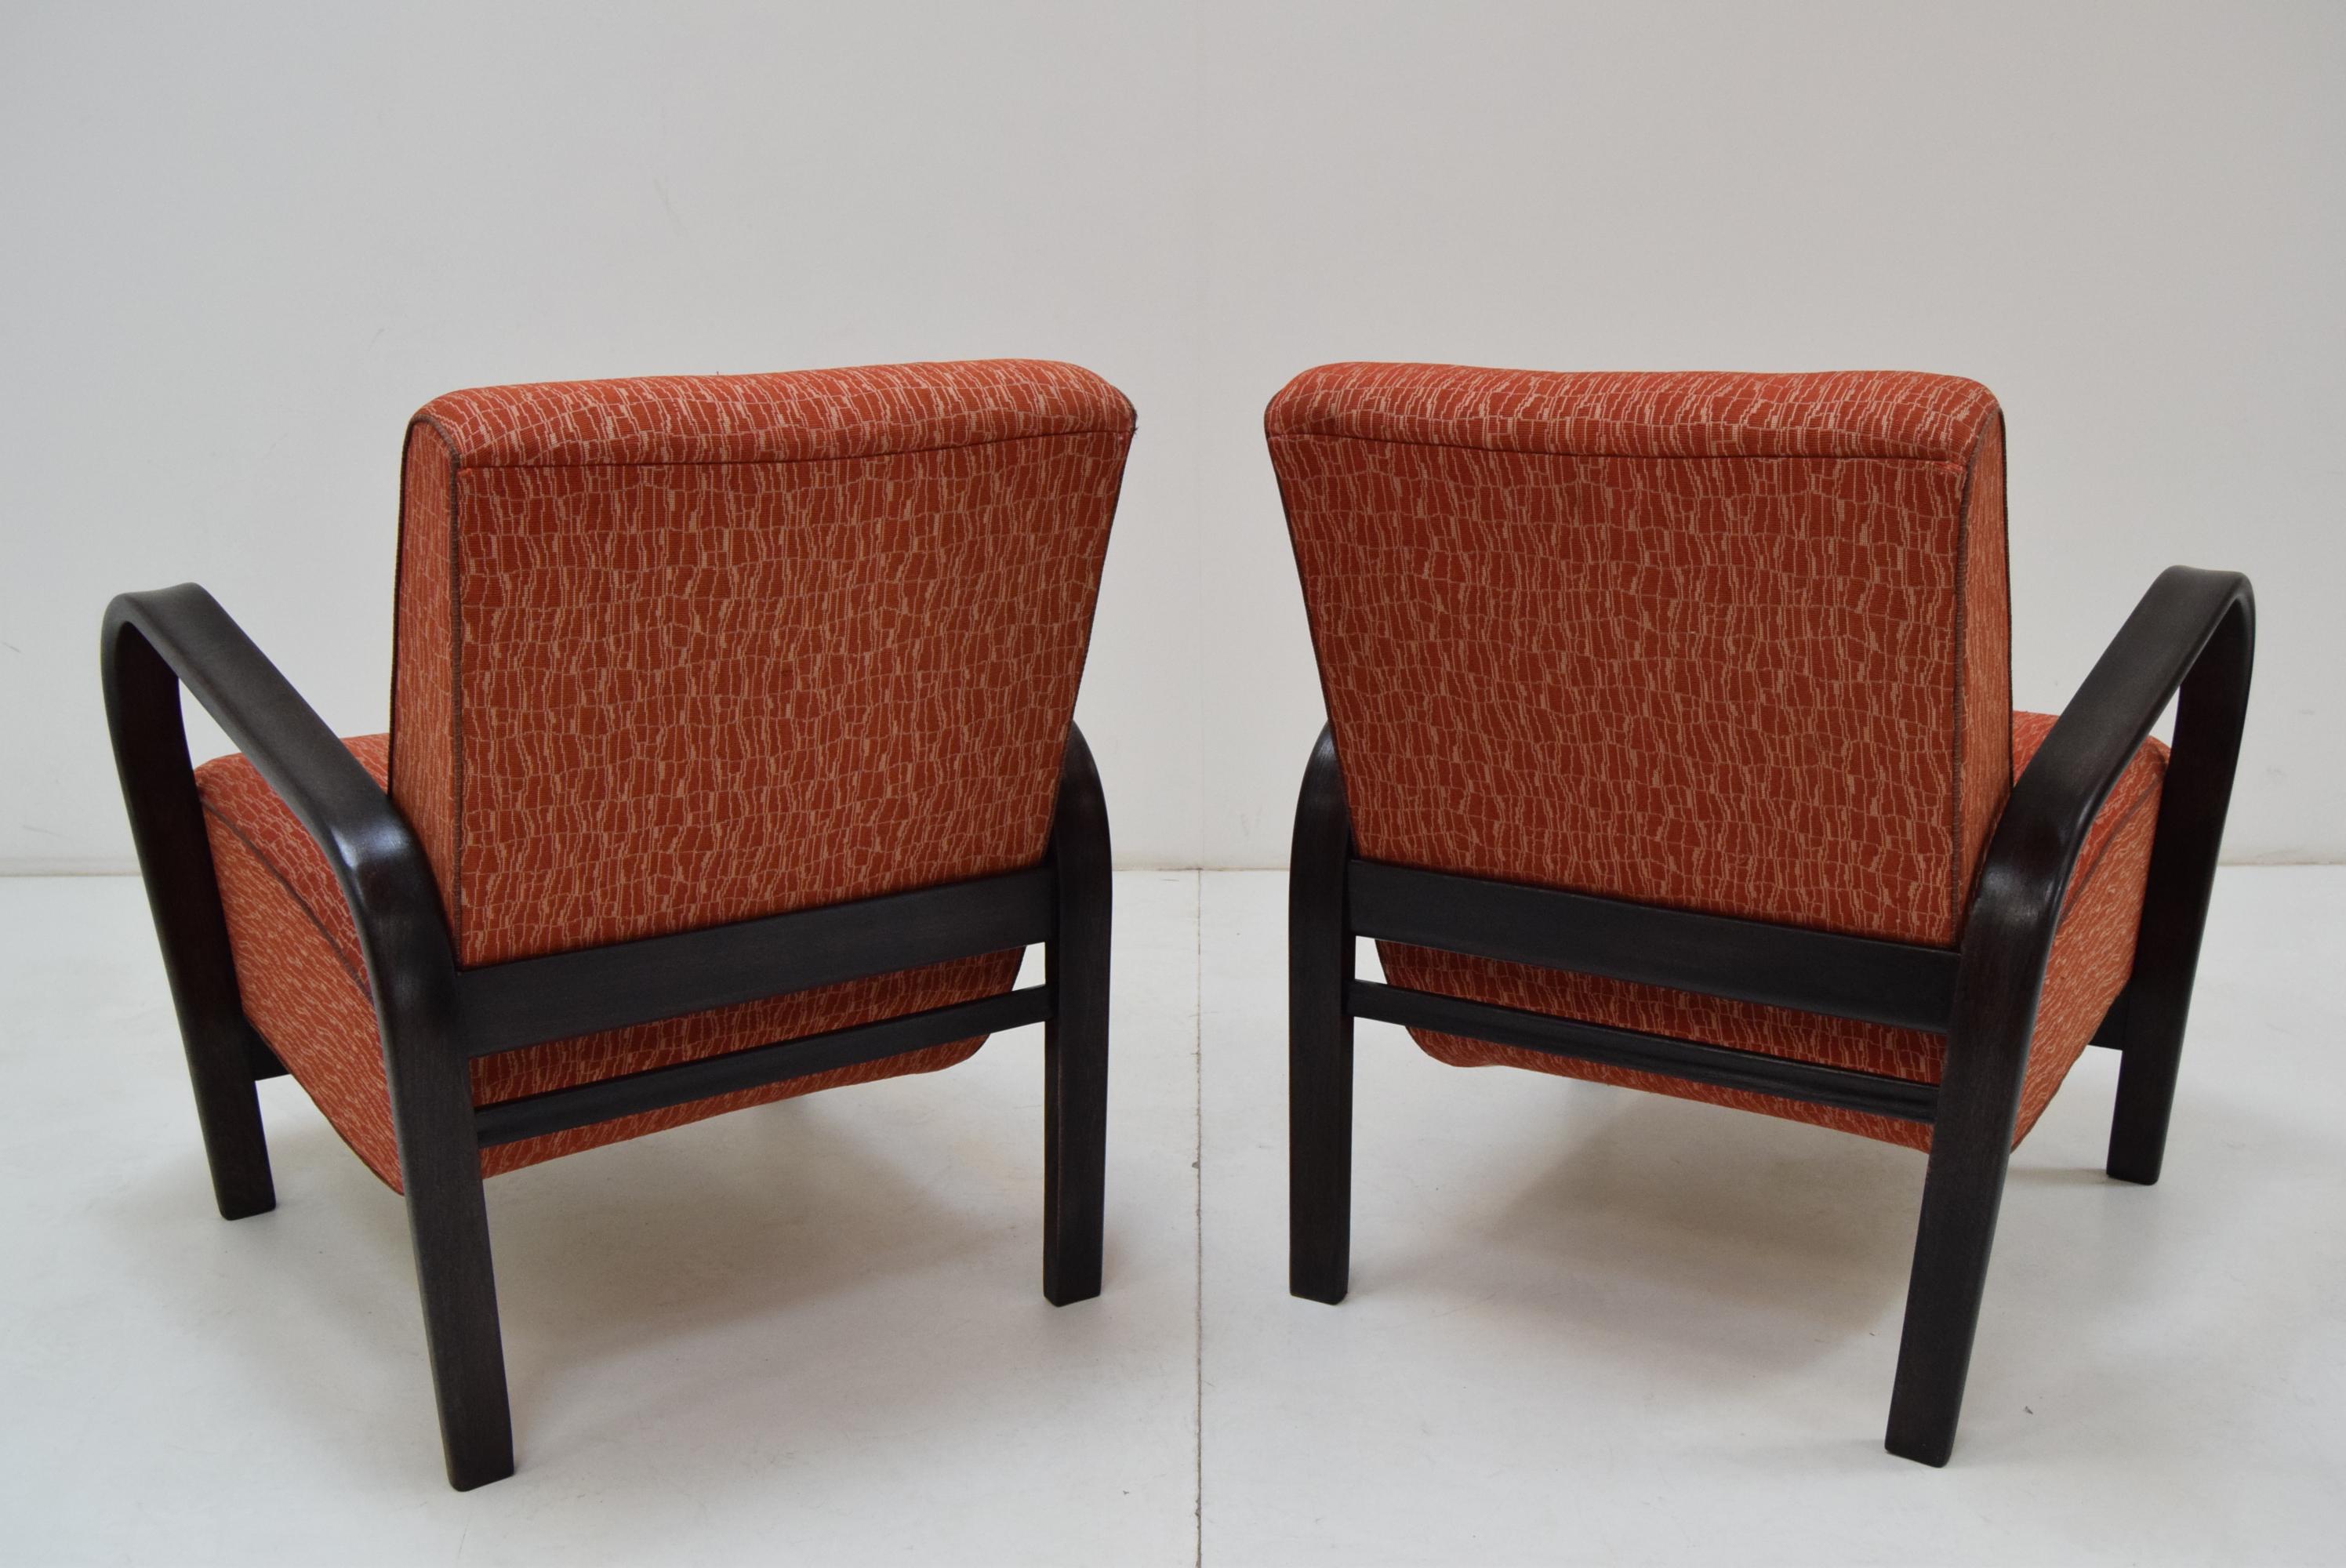 Fabric Pair of Art Deco Design Armchairs by Kropacek and Kozelka, 1930's For Sale